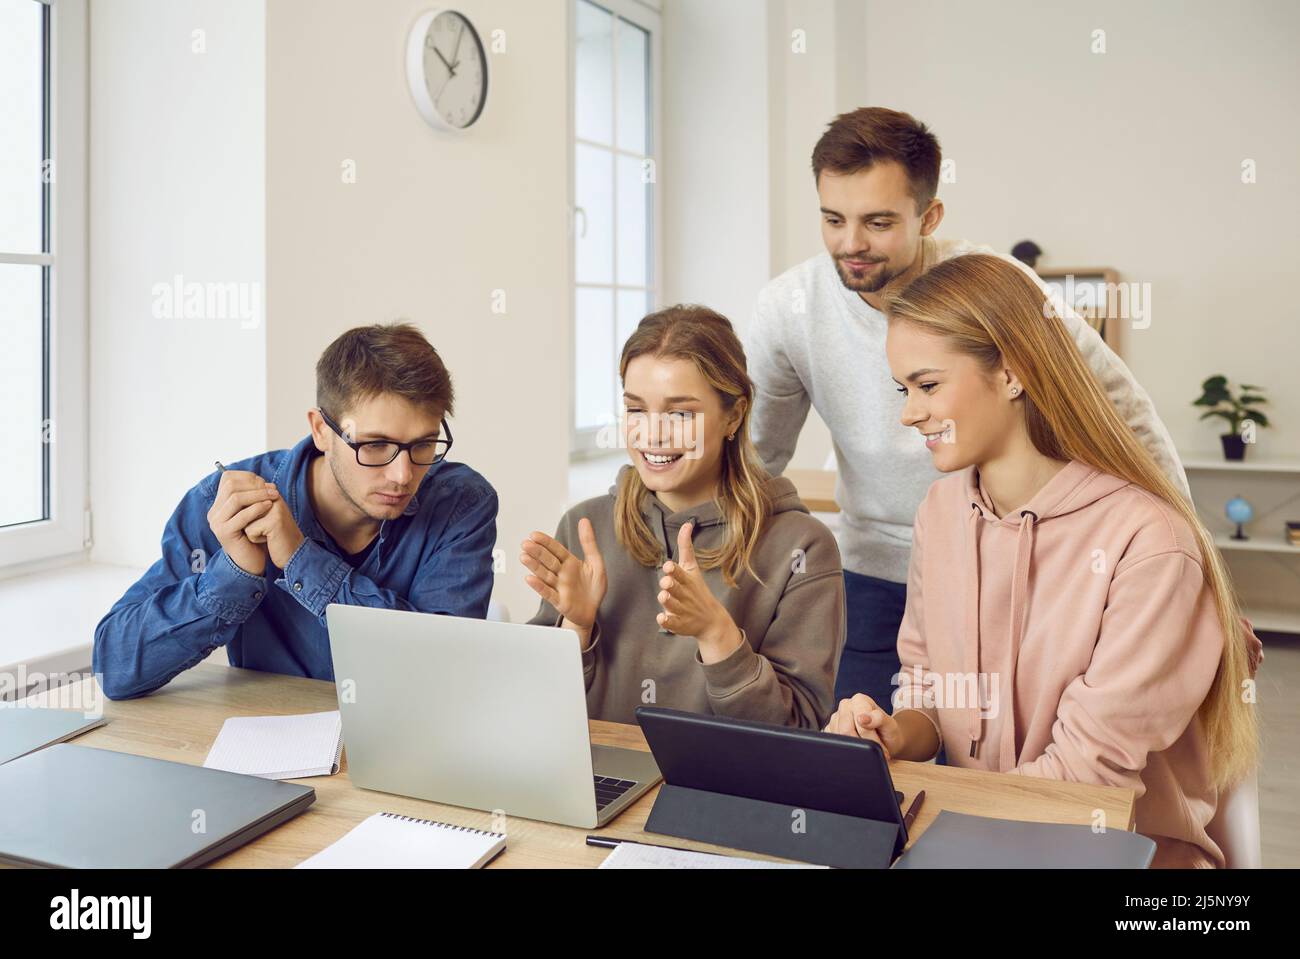 Happy university students using laptop and tablet while working on group project Stock Photo